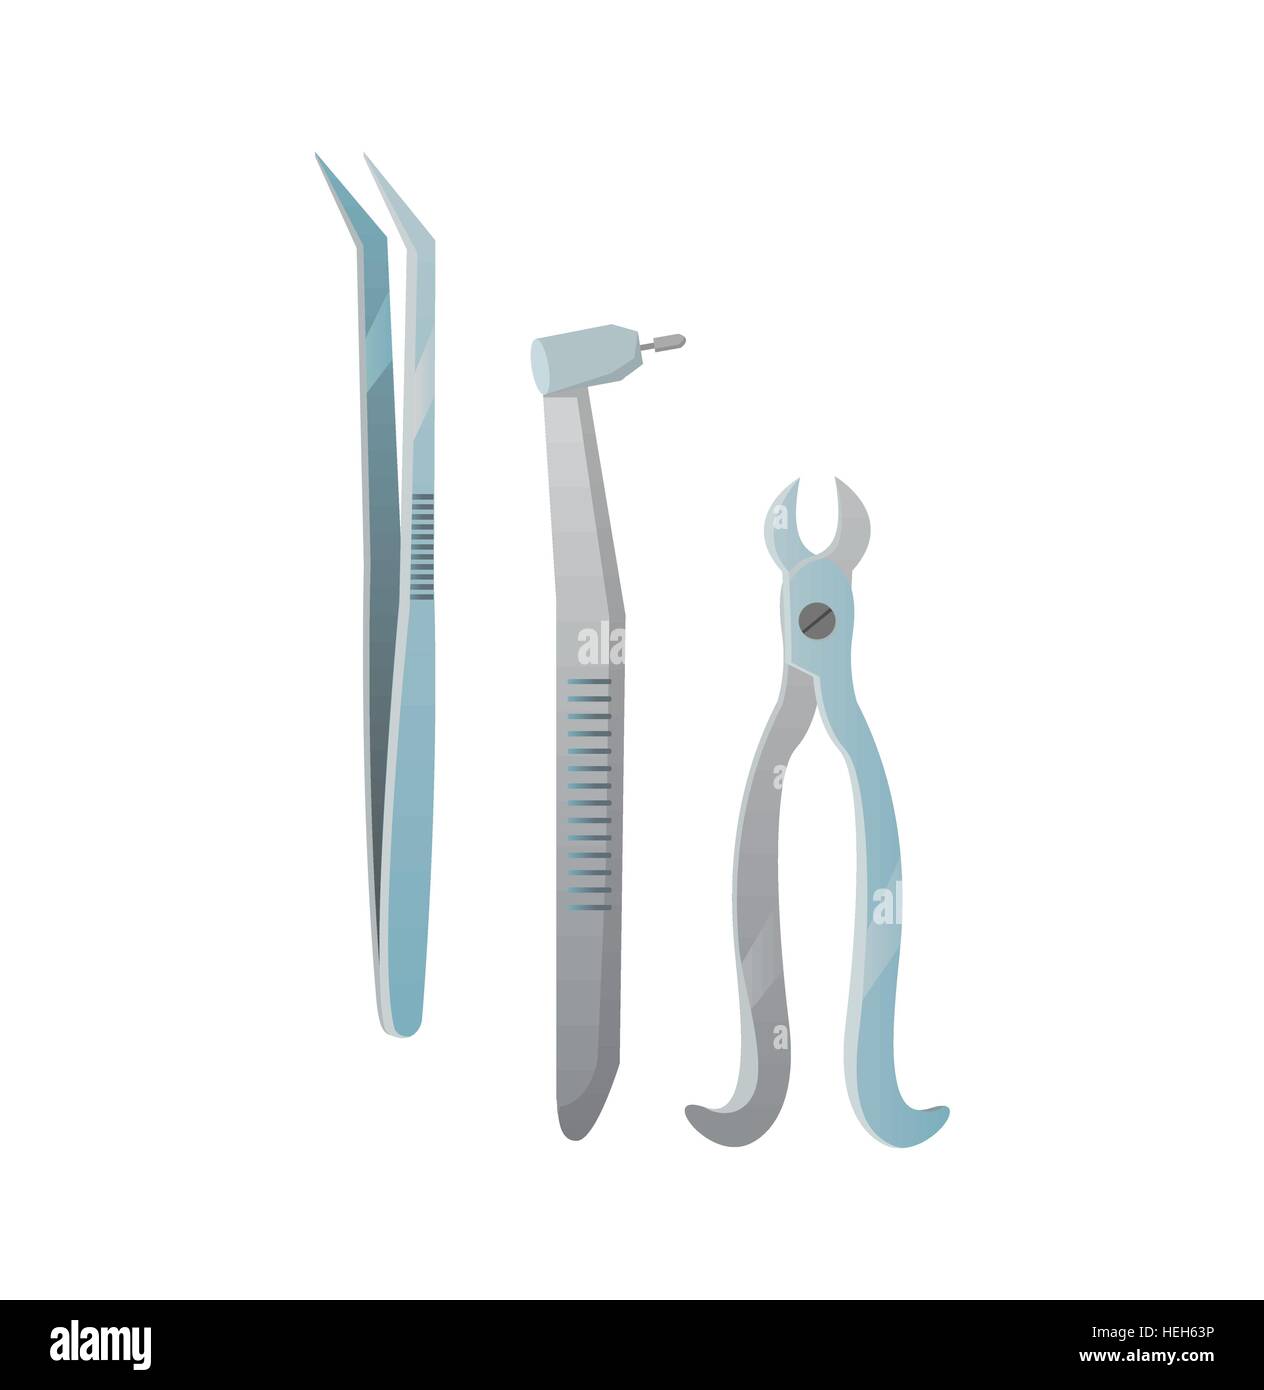 Tools dentist set design flat isolated. Care and hygiene medicine tool, medical dentistry tools, mirror dental equipment Stock Vector